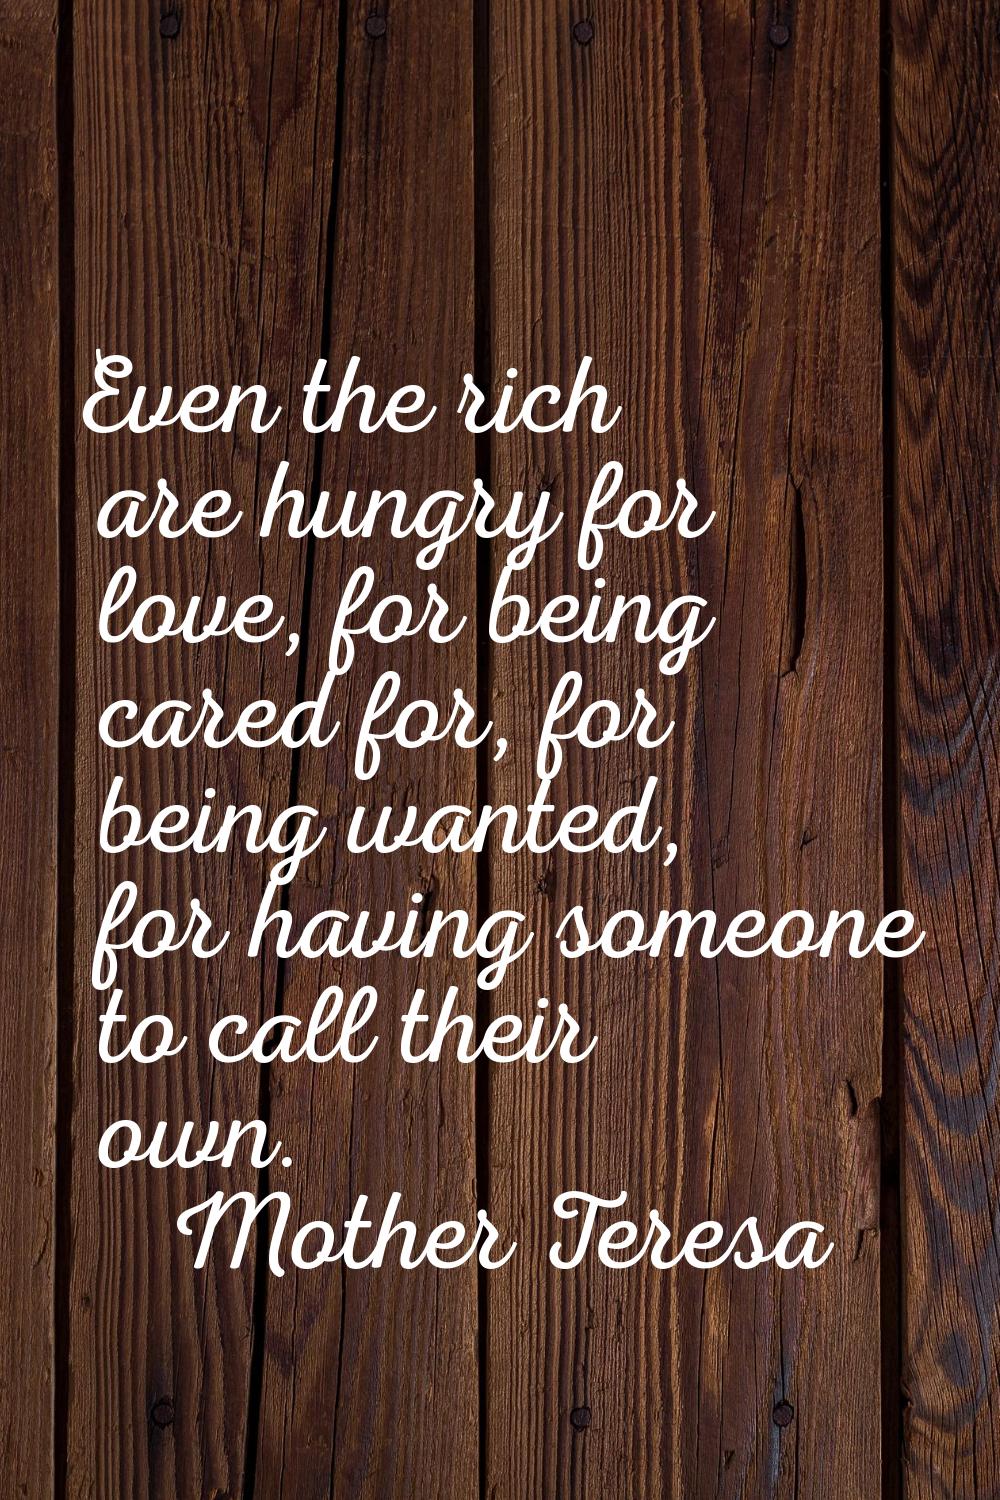 Even the rich are hungry for love, for being cared for, for being wanted, for having someone to cal